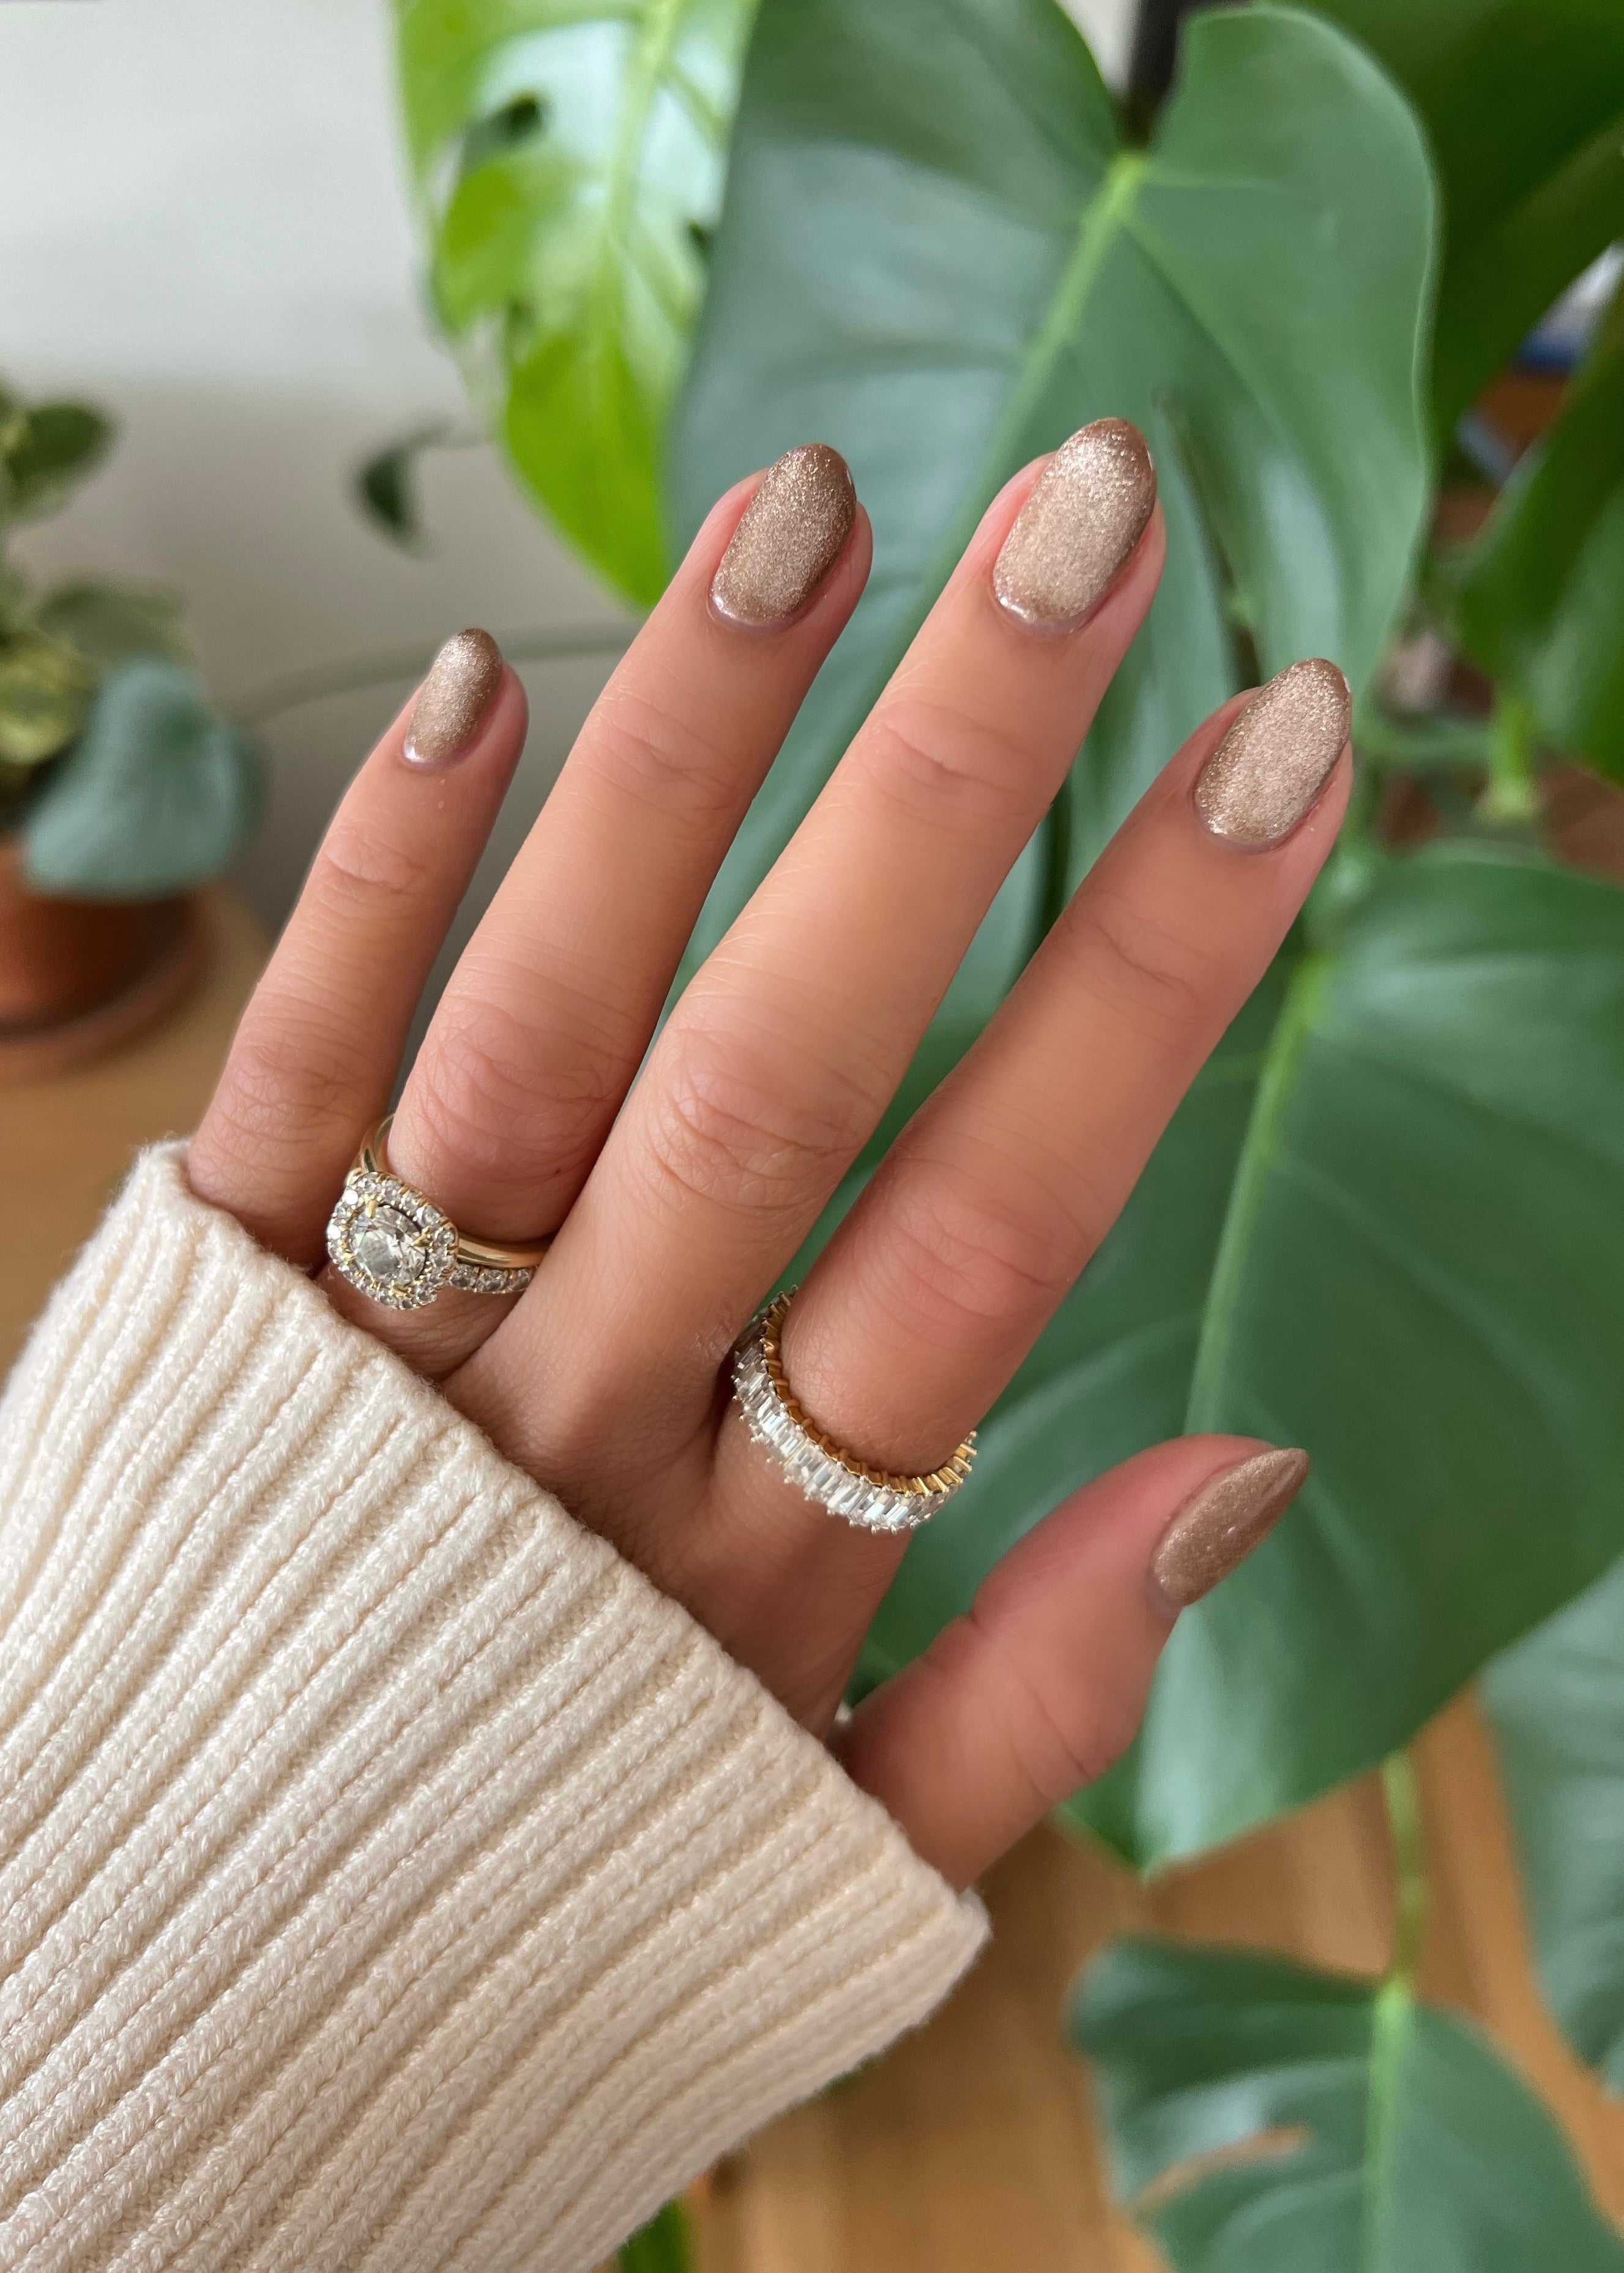 21 of the Best Winter Nail Designs to Inspire Your Next At-Home Mani